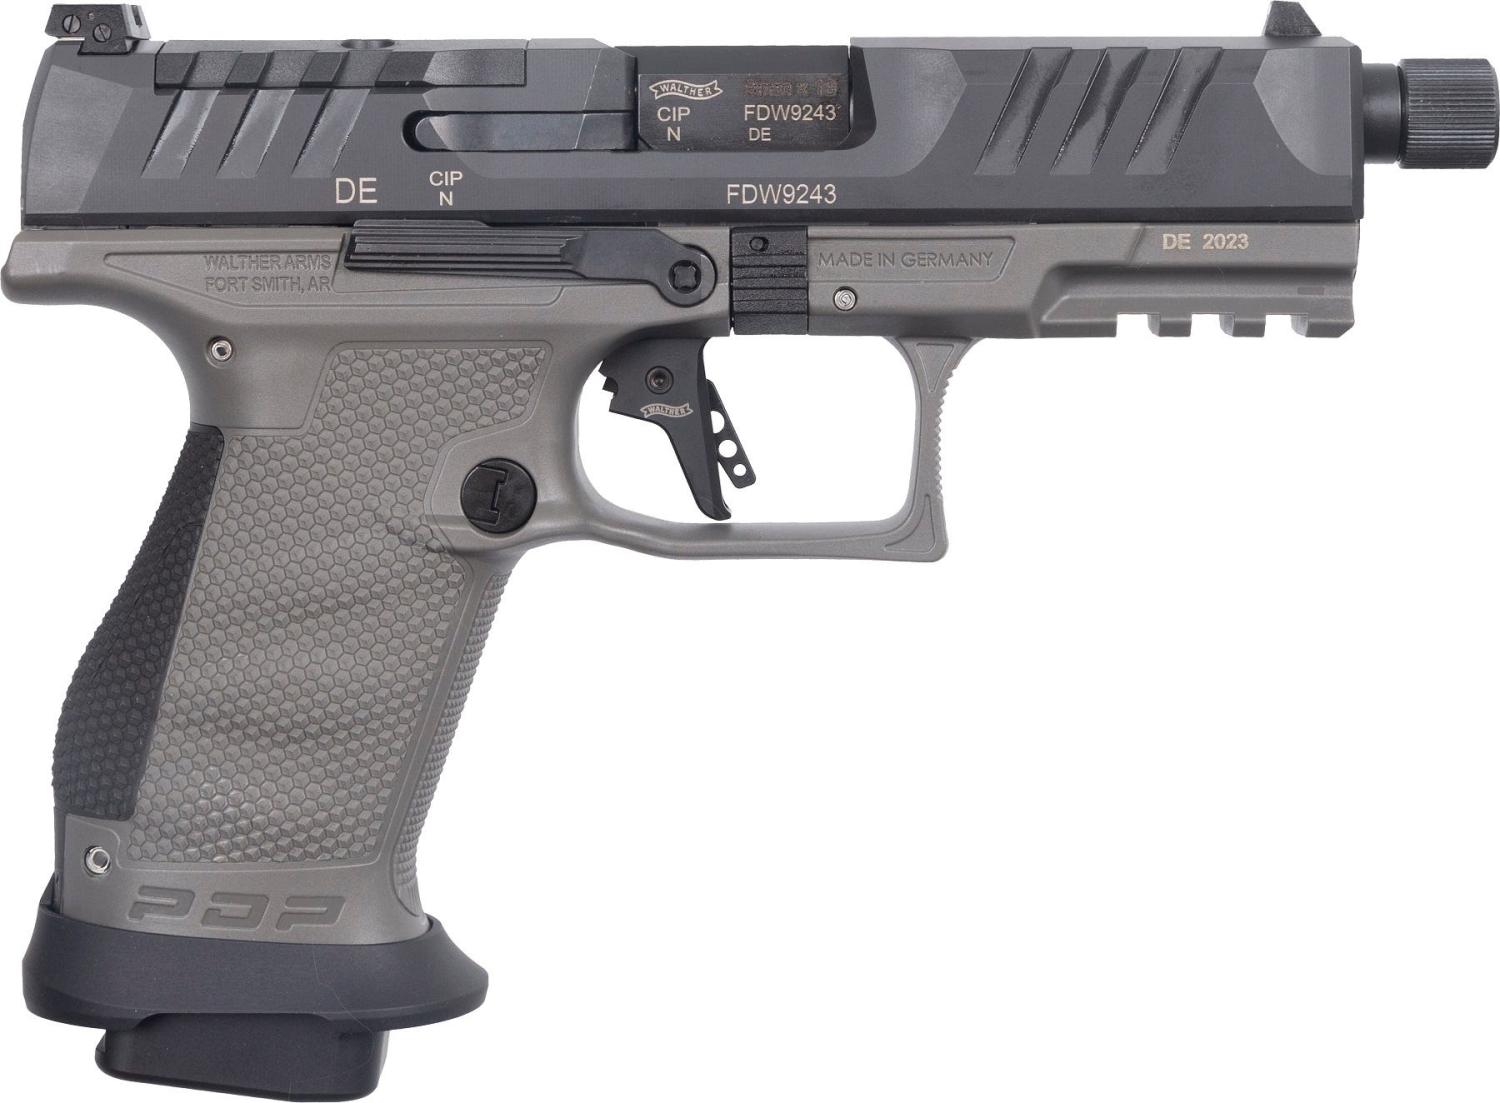 Walther PDP Pro SD Compact Grey 9mm 4.6" Barrel 18-Rounds 3 Mags - $688.09 (E-Mail Price) 